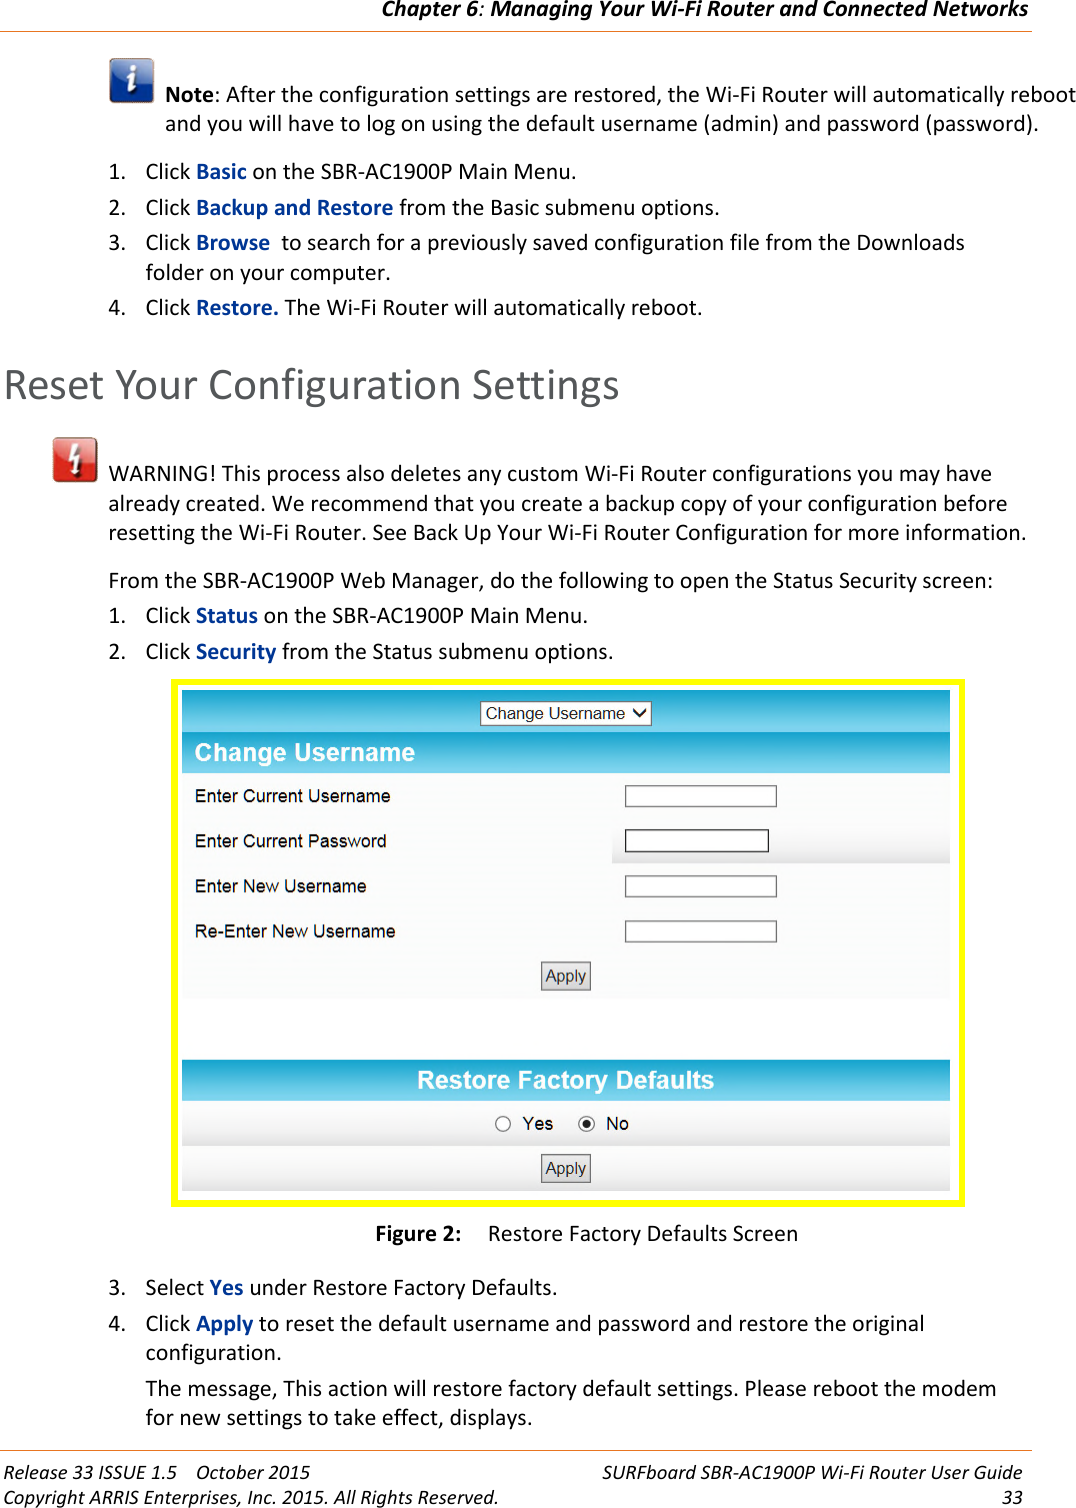 Chapter 6:Managing Your Wi-Fi Router and Connected NetworksRelease 33 ISSUE 1.5 October 2015 SURFboard SBR-AC1900P Wi-Fi Router User GuideCopyright ARRIS Enterprises, Inc. 2015. All Rights Reserved. 33Note: After the configuration settings are restored, the Wi-Fi Router will automatically rebootand you will have to log on using the default username (admin) and password (password).1. Click Basic on the SBR-AC1900P Main Menu.2. Click Backup and Restore from the Basic submenu options.3. Click Browse to search for a previously saved configuration file from the Downloadsfolder on your computer.4. Click Restore. The Wi-Fi Router will automatically reboot.Reset Your Configuration SettingsWARNING! This process also deletes any custom Wi-Fi Router configurations you may havealready created. We recommend that you create a backup copy of your configuration beforeresetting the Wi-Fi Router. See Back Up Your Wi-Fi Router Configuration for more information.From the SBR-AC1900P Web Manager, do the following to open the Status Security screen:1. Click Status on the SBR-AC1900P Main Menu.2. Click Security from the Status submenu options.Figure 2: Restore Factory Defaults Screen3. Select Yes under Restore Factory Defaults.4. Click Apply to reset the default username and password and restore the originalconfiguration.The message, This action will restore factory default settings. Please reboot the modemfor new settings to take effect, displays.